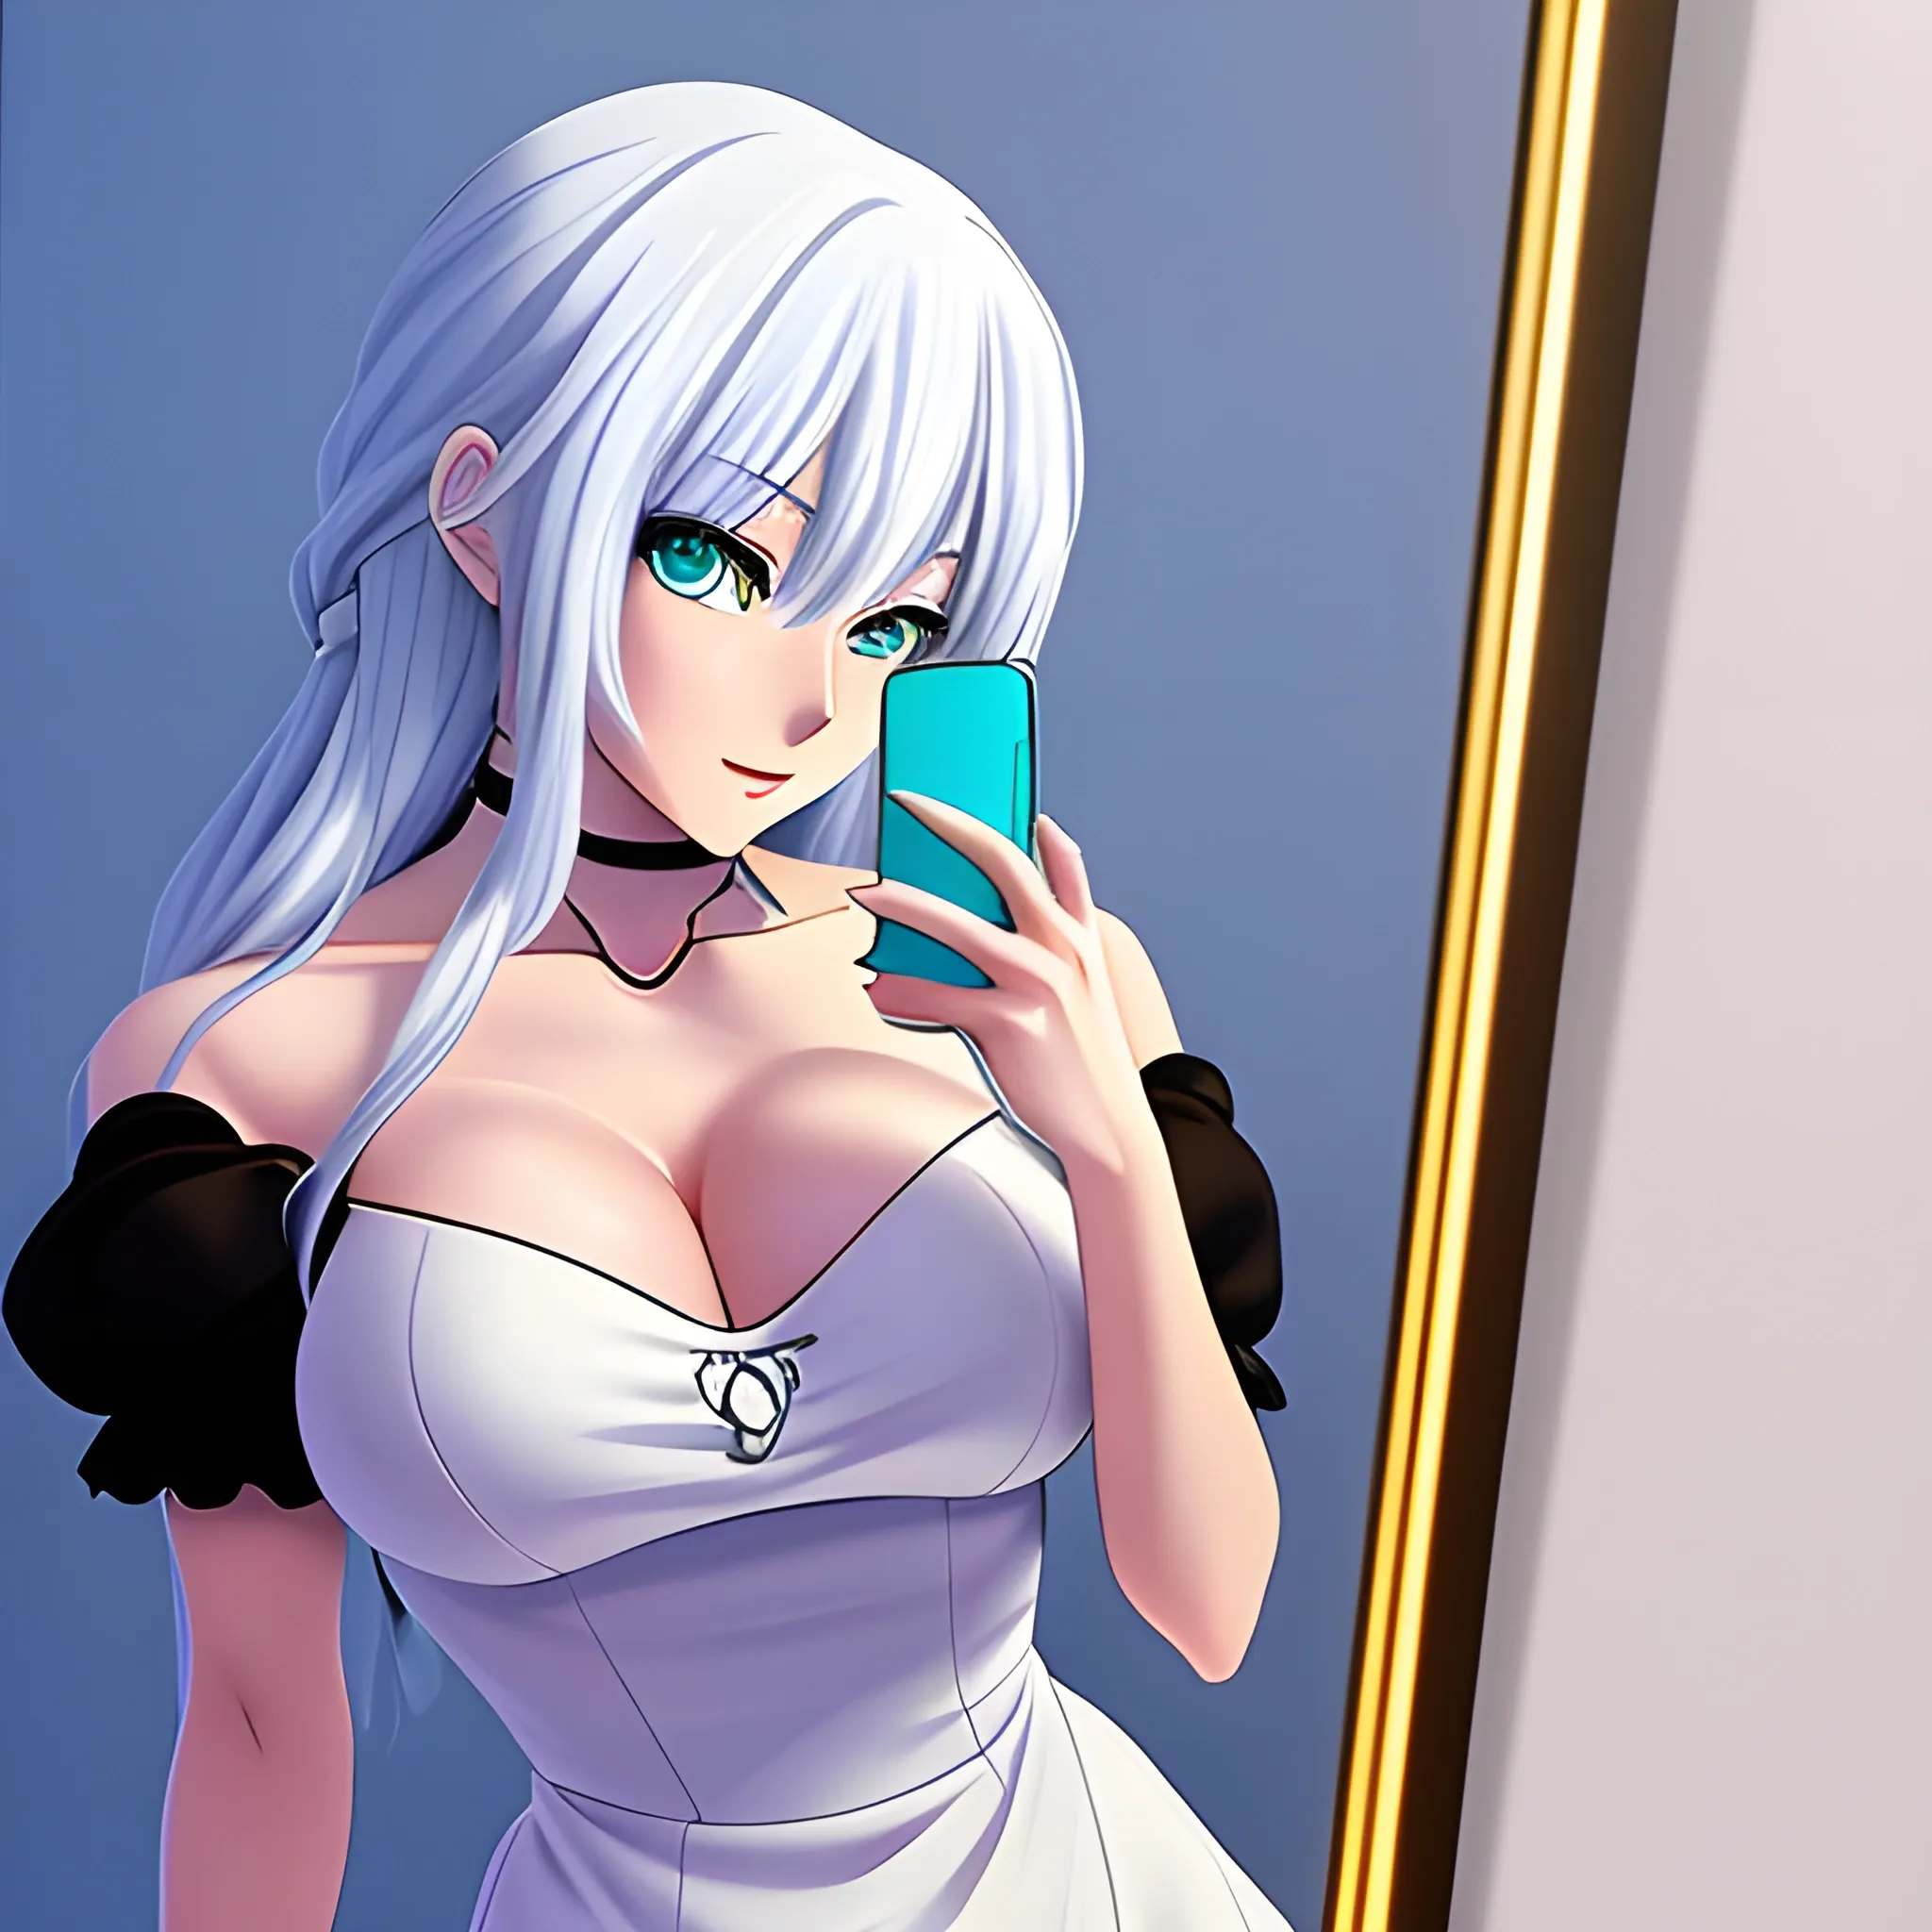 18 years old anime girl that looks into the mirror and holds an ... -  Arthub.ai